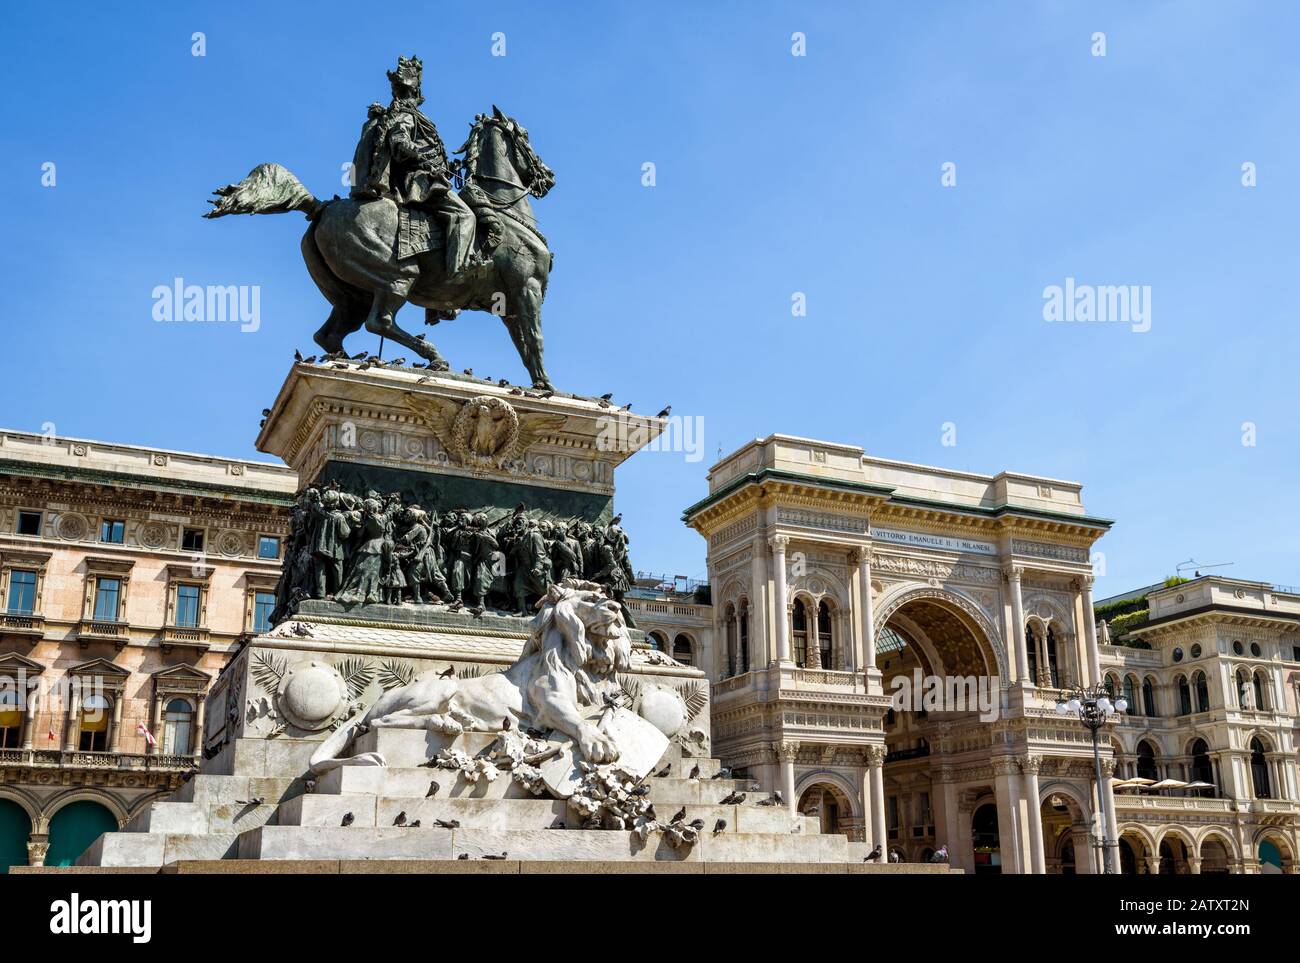 Monument to Vittorio Emanuele II and Galleria Vittorio Emanuele II on the Piazza del Duomo (Cathedral Square) in central Milan, Italy. This gallery is Stock Photo